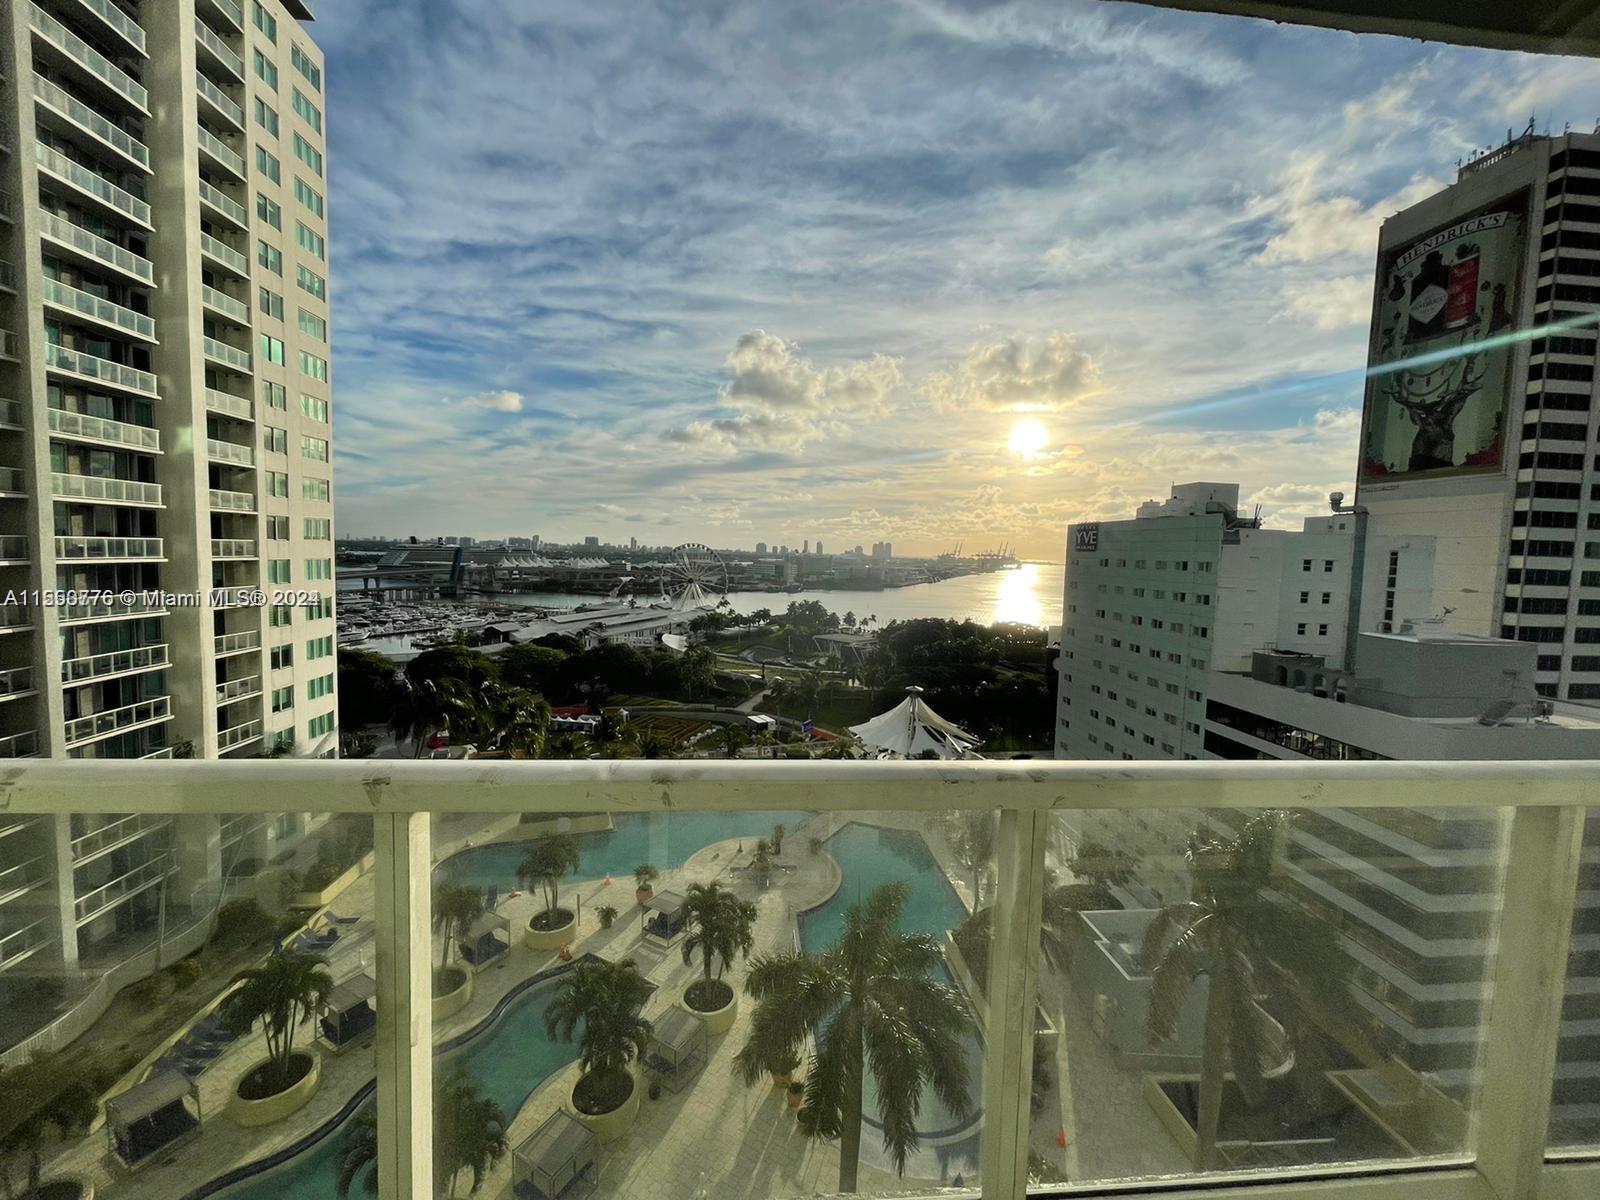 Great for investors!!! The unit is rented until October 2024. We need 24 hs in advance to schedule the showing.
GREAT LOCATION - BEST WATER VIEW IN Downtown Miami TO THE PORT OF MIAMI AND JUST ACROSS THE BAY-FRONT PARK. THIS COZY UNIT HAS A NEW Ceramic
FLOOR, STAINLESS STEELL APPLIANCES. WASHER AND DRYER IS IN THE UNIT. WALK IN CLOSET. THE AMENITIES ARE VERY HIGH END SERVICES